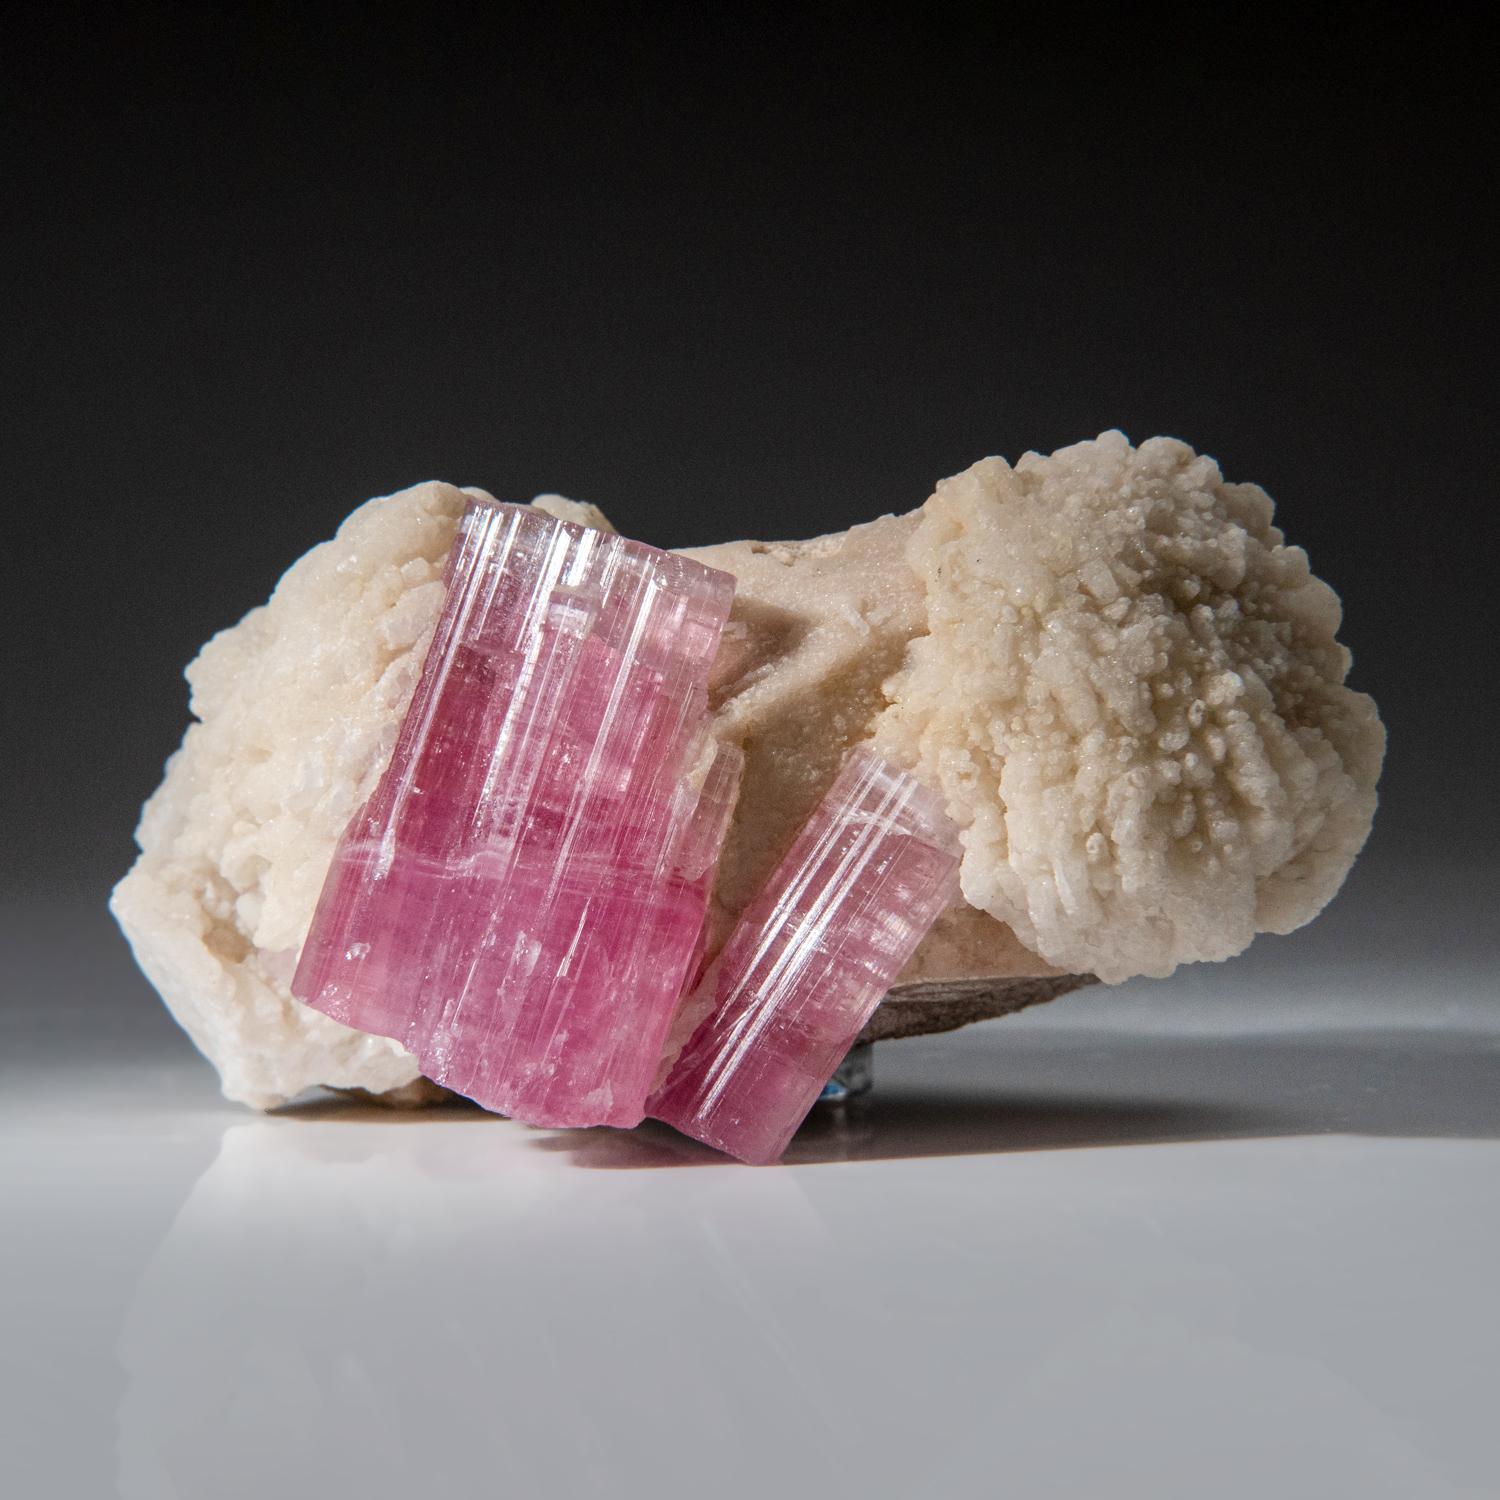 from Paprok, Kamdesh District, Nuristan Province, Afghanistan

Superb specimen of lustrous Rubellite var. pink tourmaline crystals fully terminated in a parallel formation embedded on Albite microline matrix. The tourmaline crystals have rich